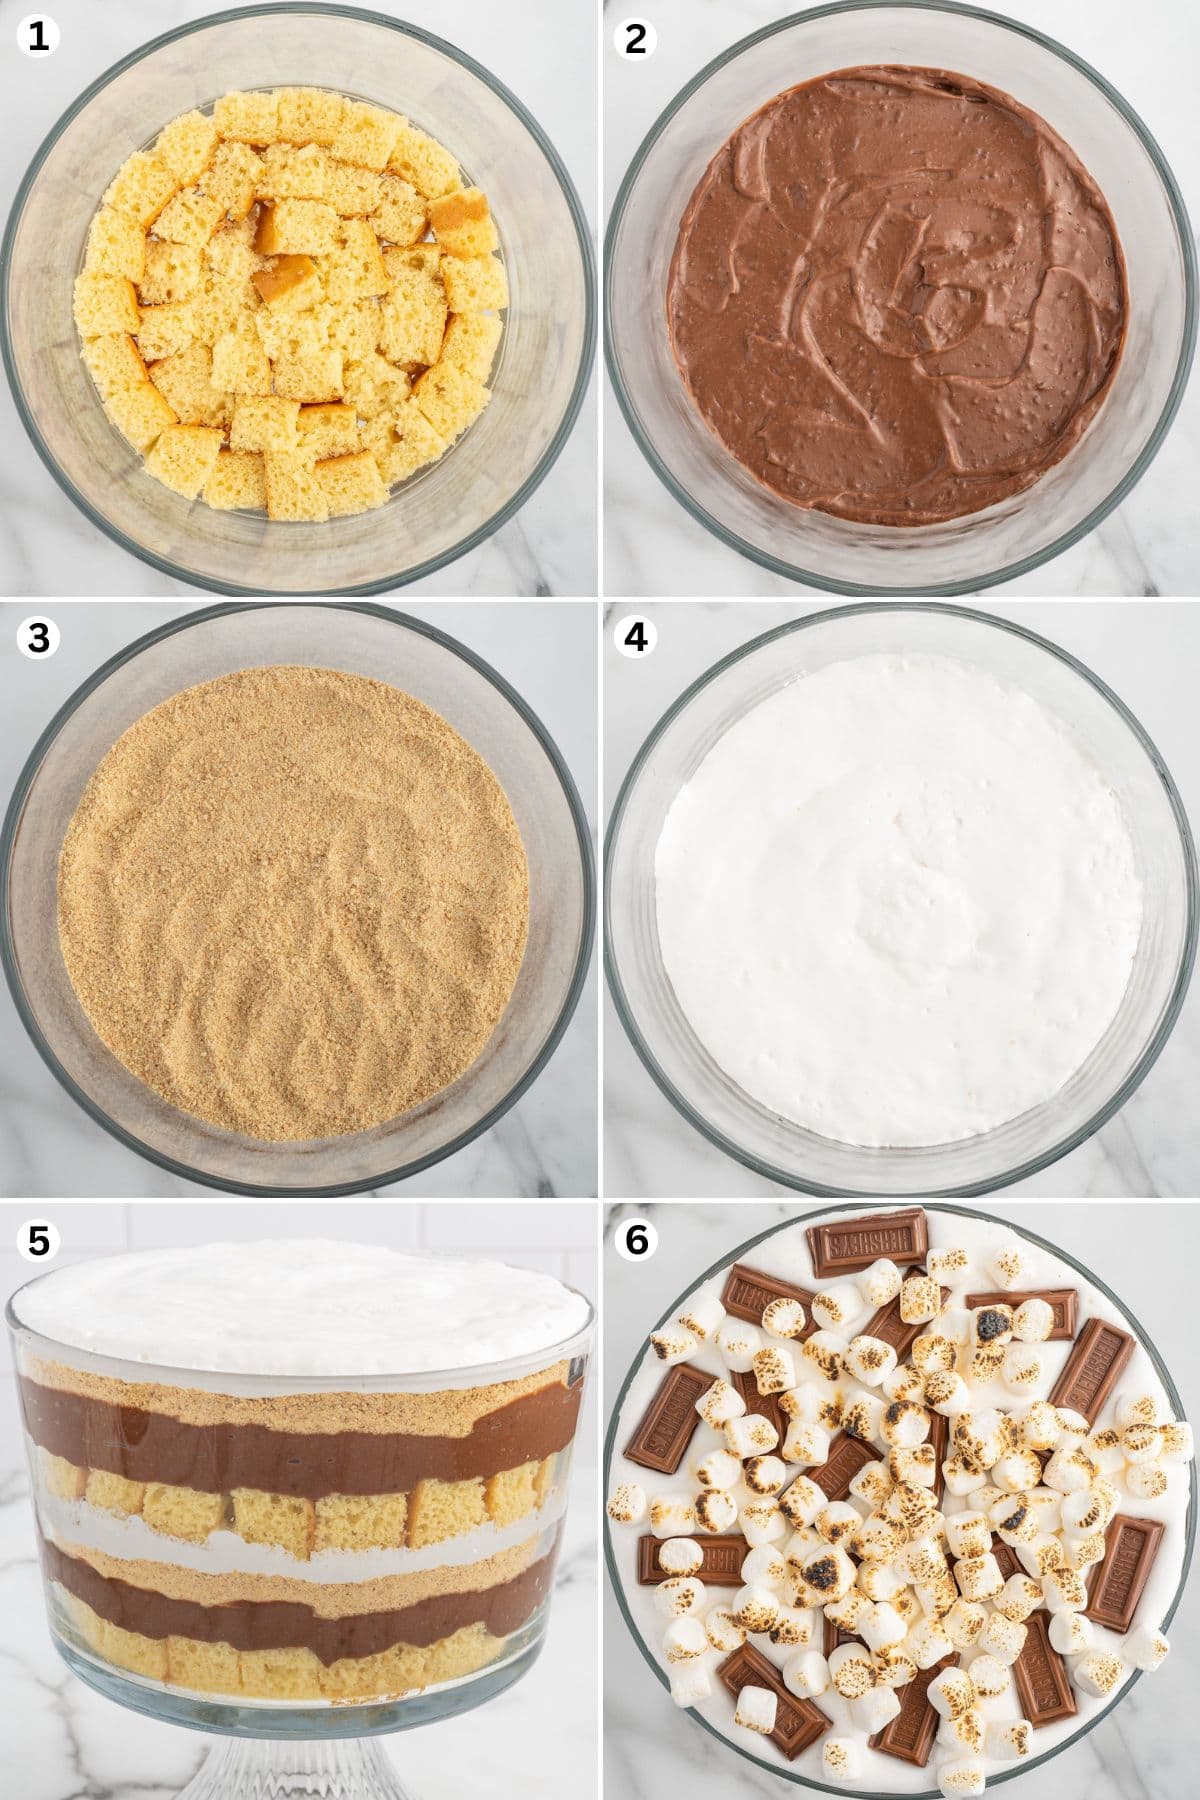 Create a single layer of cake cubes at the bottom. Add the chocolate pudding. Spread graham cracker crumbs over the pudding layer. Add marshmallow creme. Repeat the 1 to 4 steps. Arrange the candy bar pieces, marshmallow creme and toasted mini marshmallows.